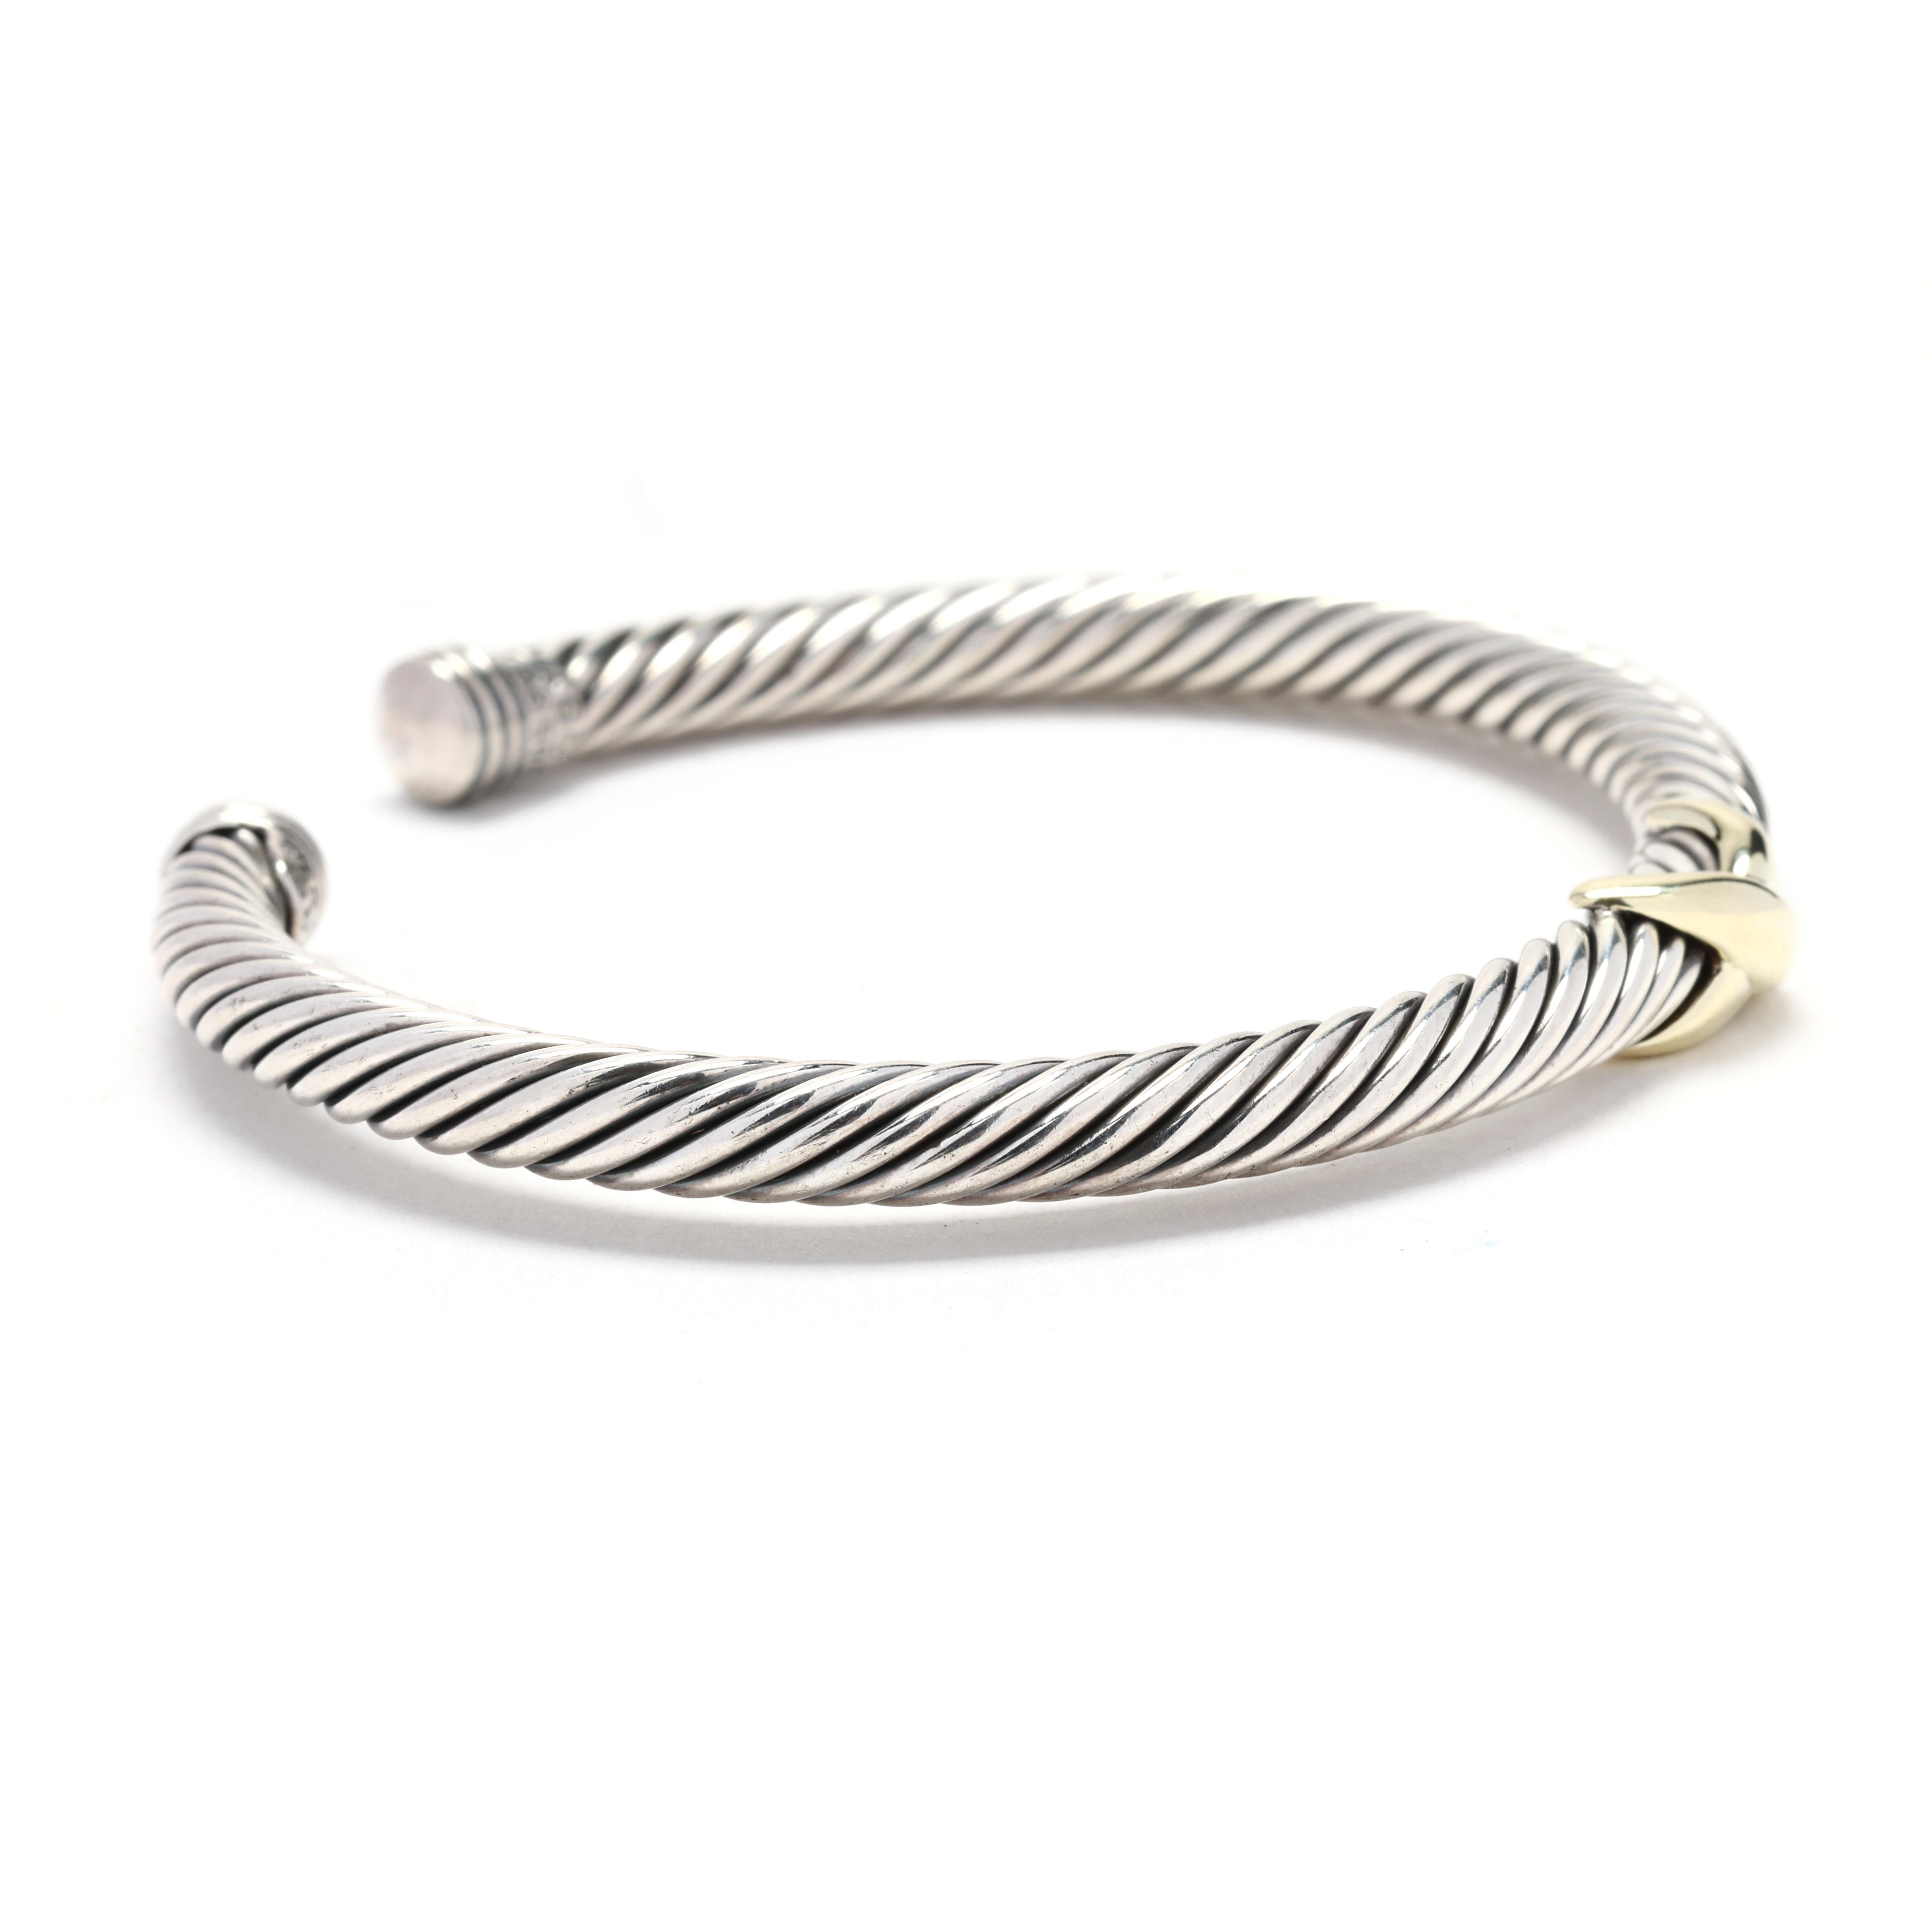 This beautiful David Yurman X Collection cuff bracelet is made from 14k yellow gold and sterling silver. The cuff features a unique X design, with one side in yellow gold and the other in silver. The combination of the two metals creates a bold and